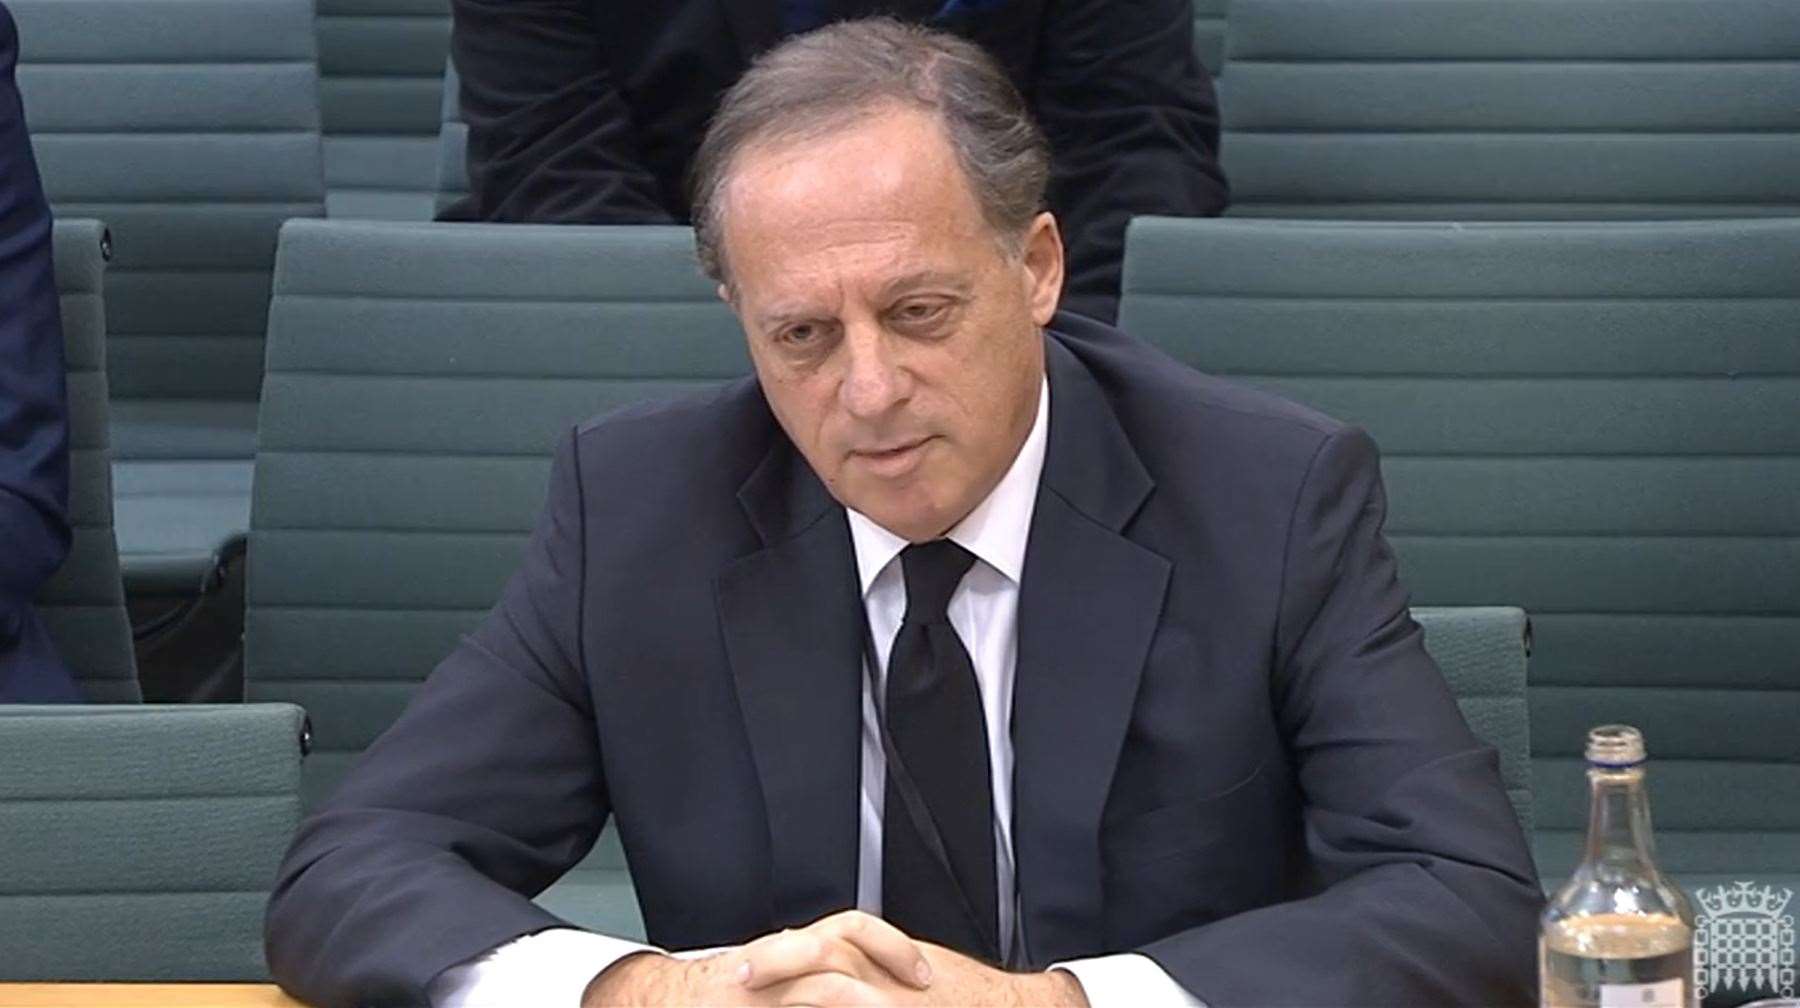 The committee said Richard Sharp should consider the impact of his actions on trust in the BBC (House of Commons/PA)